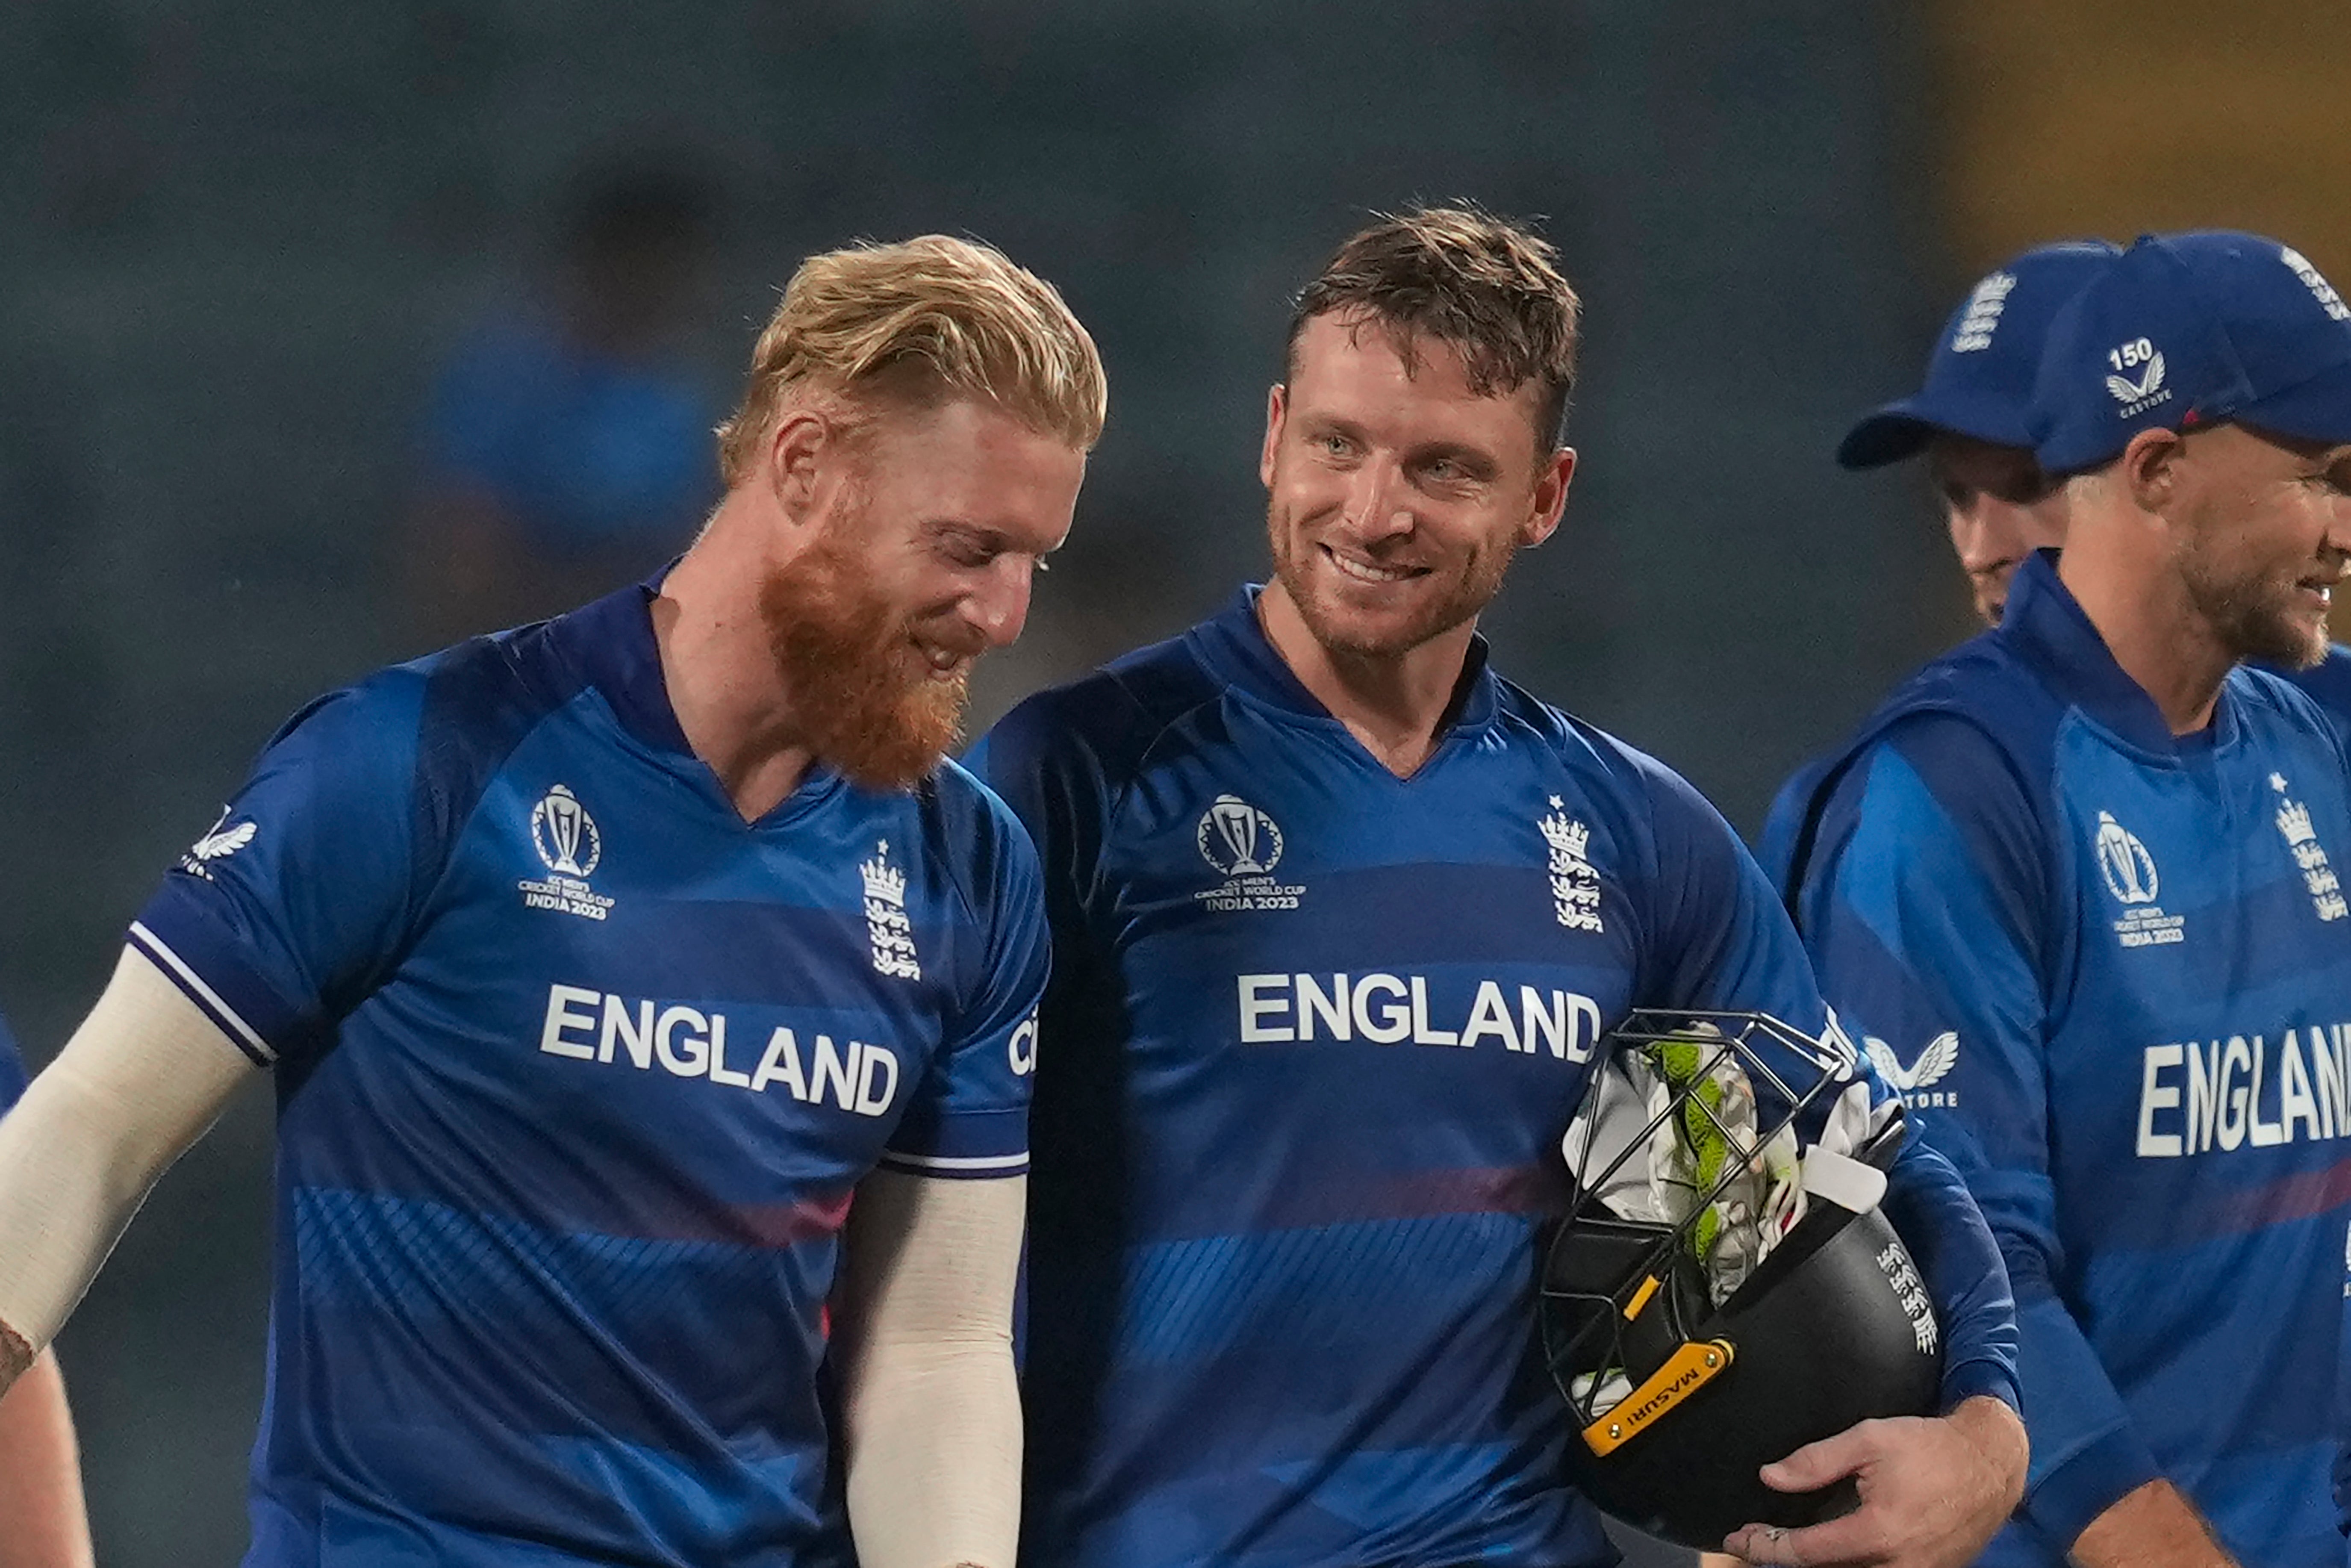 Ben Stokes led England to victory with maiden World Cup century